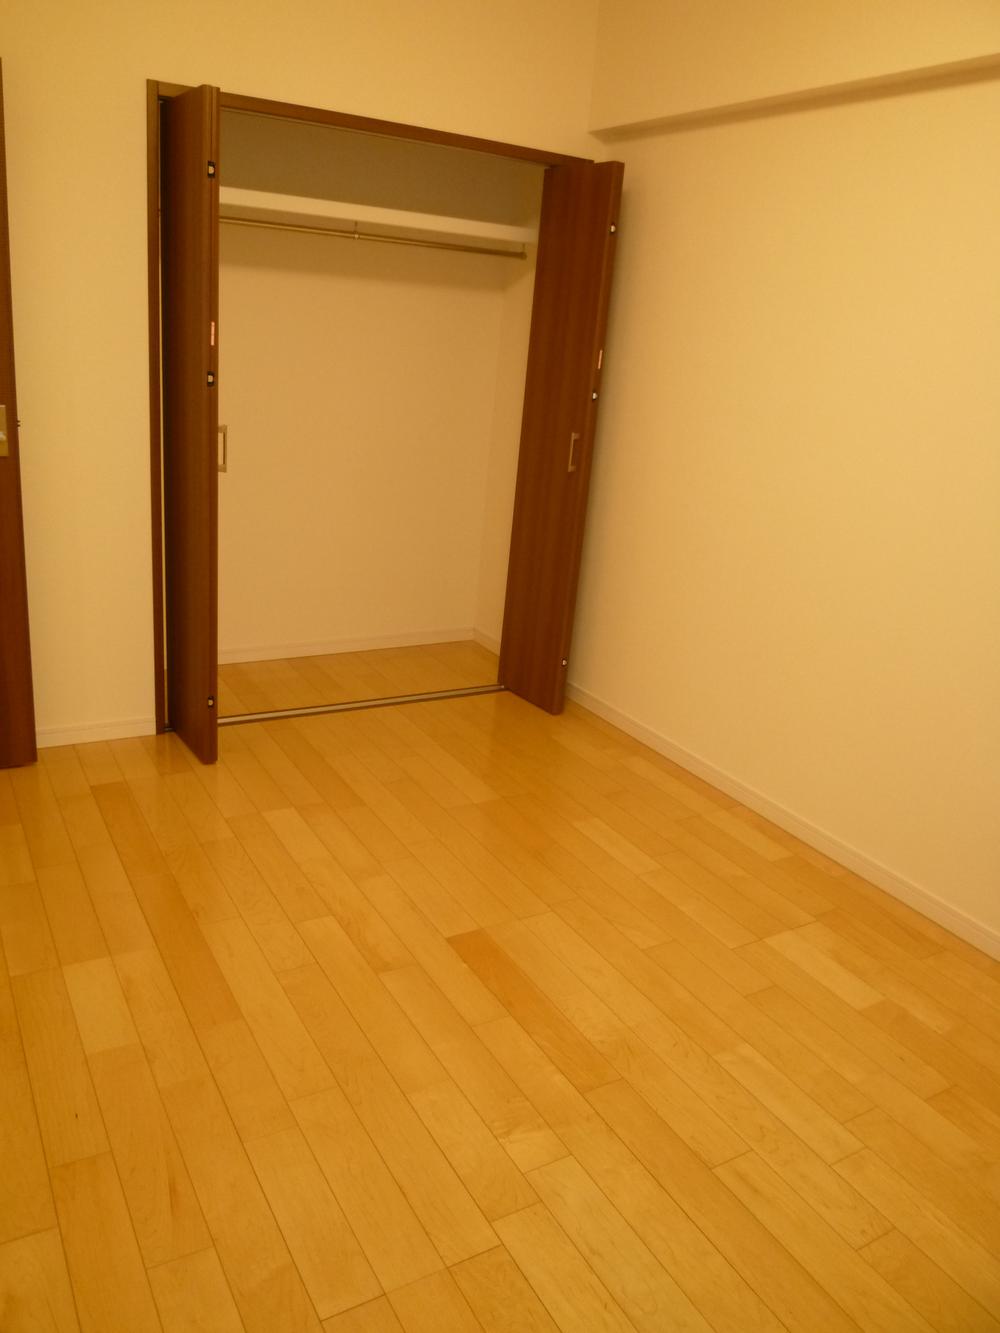 Non-living room. A storage capacity of about 6.0 tatami mats of Western-style with a closet